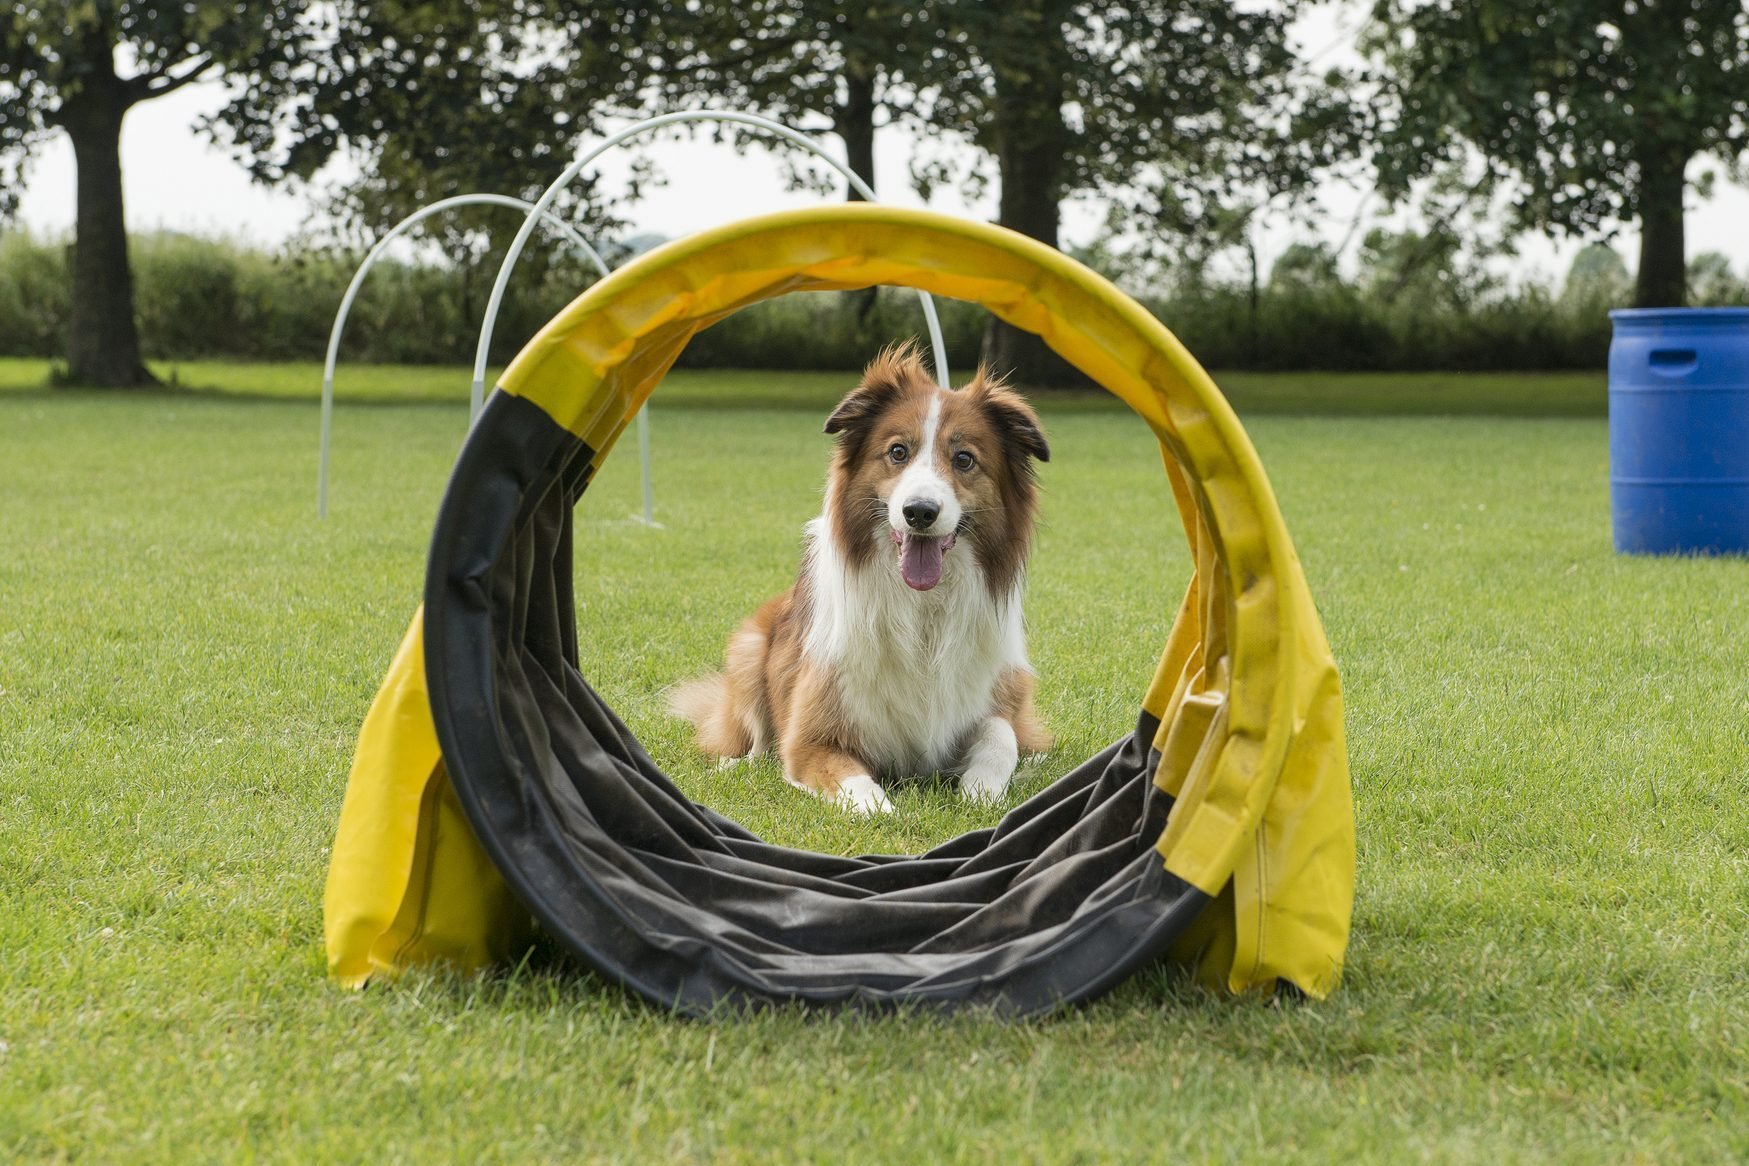 Best Dog Training and Enrichment Toys From Trainer Robert